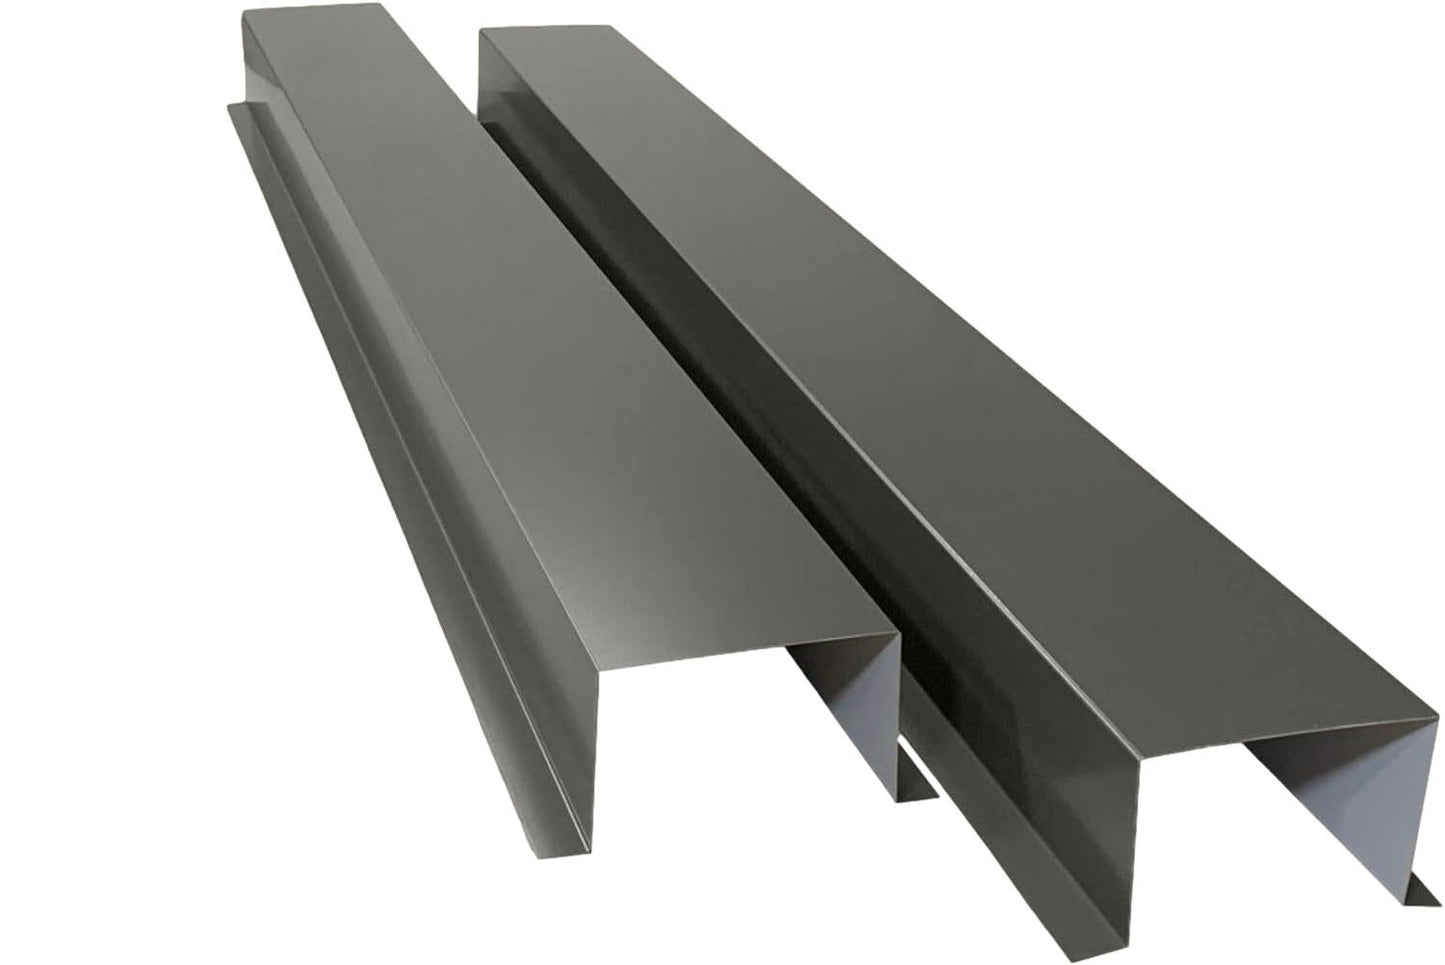 Two angled steel or metal architectural components, each with a ridge running along one edge. Positioned parallel against a white background and seen end-on, they feature smooth and uniform surfaces. These resemble elements used in **Commercial Series - 24 Gauge Painted Metal HVAC Line Set Covers - Heavy Duty, Multiple Sizes & Colors** by **Perma Cover** for HVAC line protection.